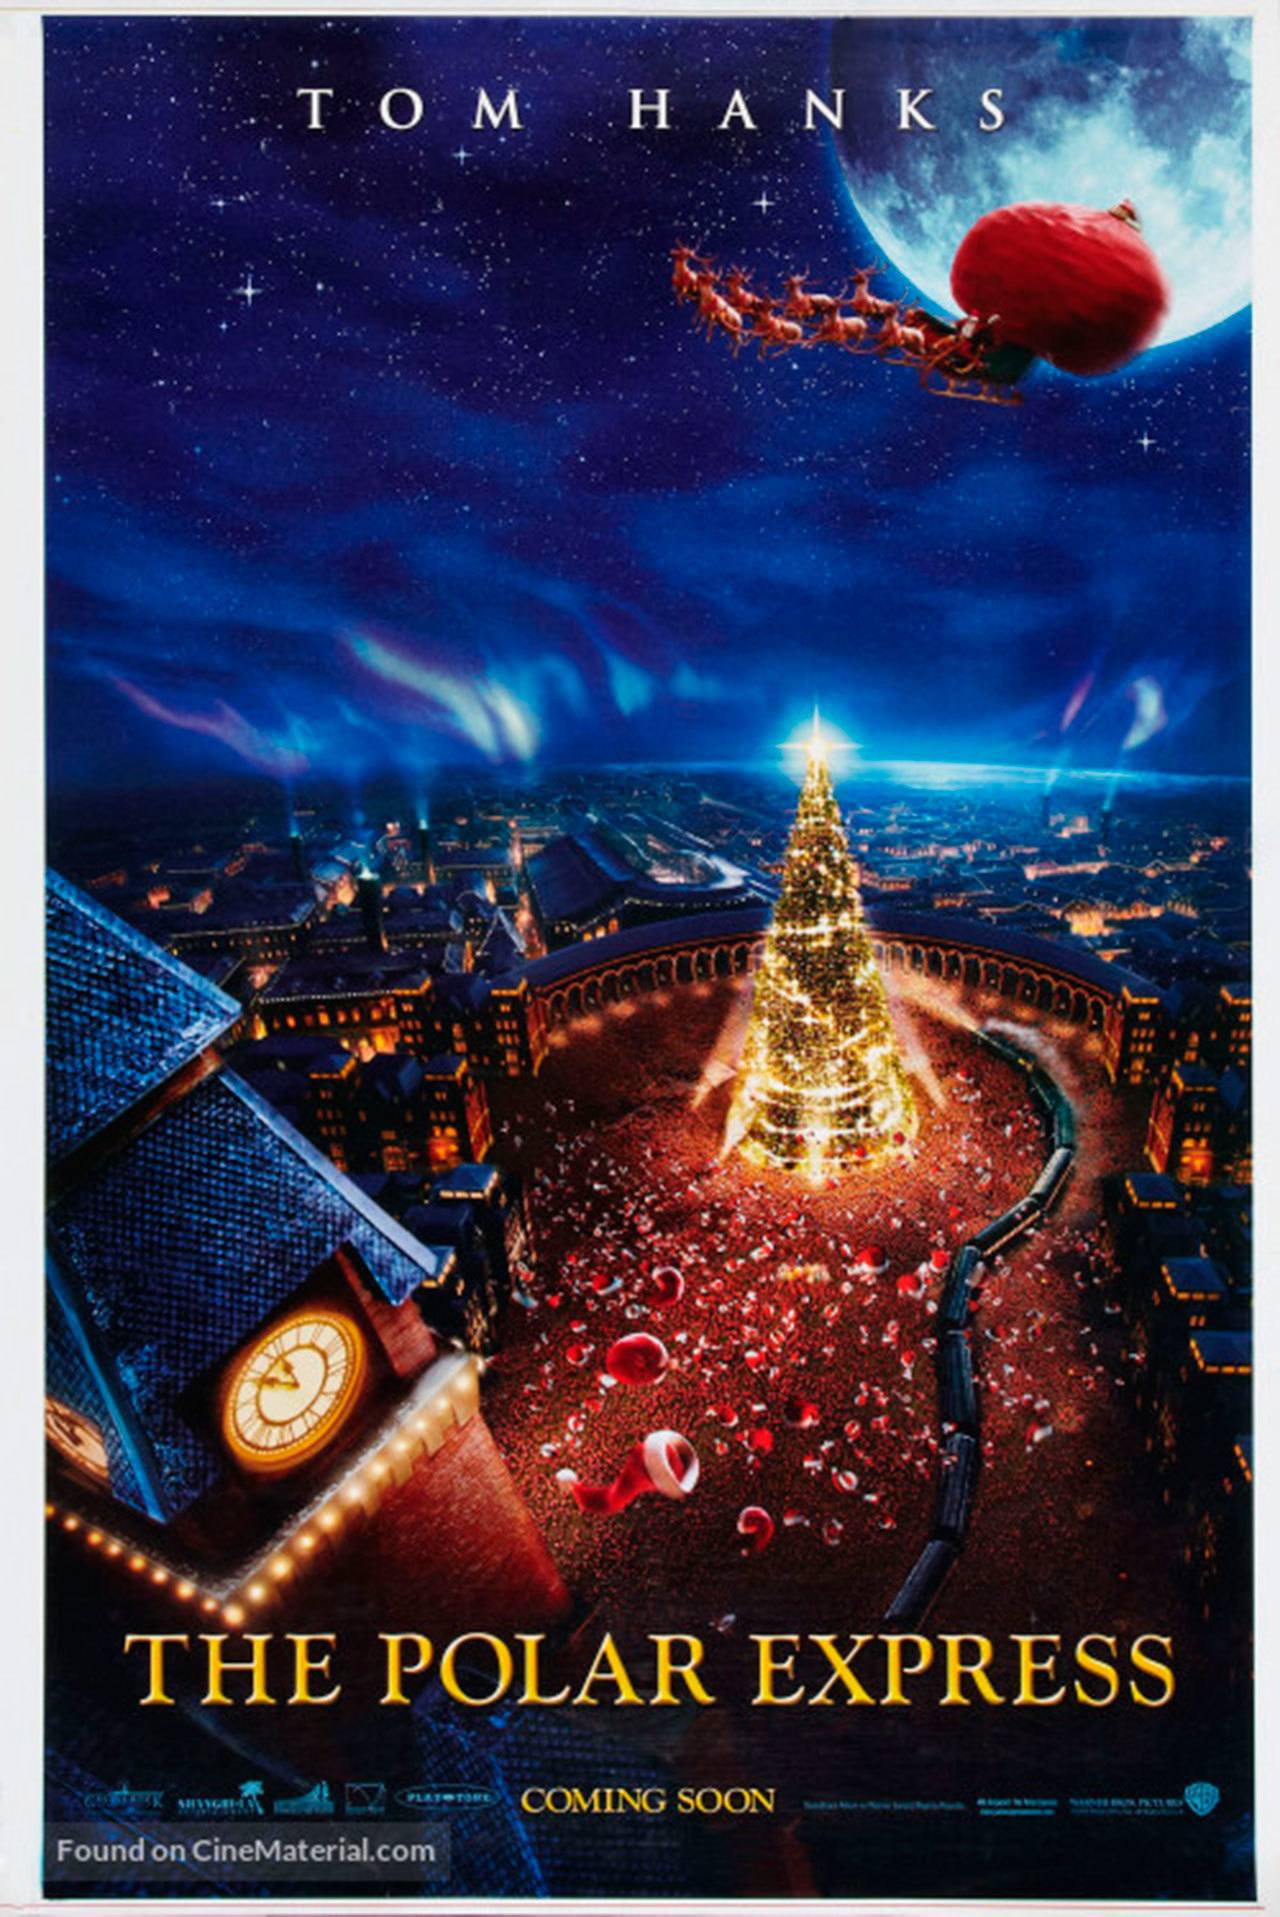 Image courtesy of Bainbridge Cinemas                                Bainbridge Cinemas and Cook Family Funeral Home will present a free Toys for Tots benefit screening of “The Polar Express” at 11 a.m. Saturday, Dec. 3.